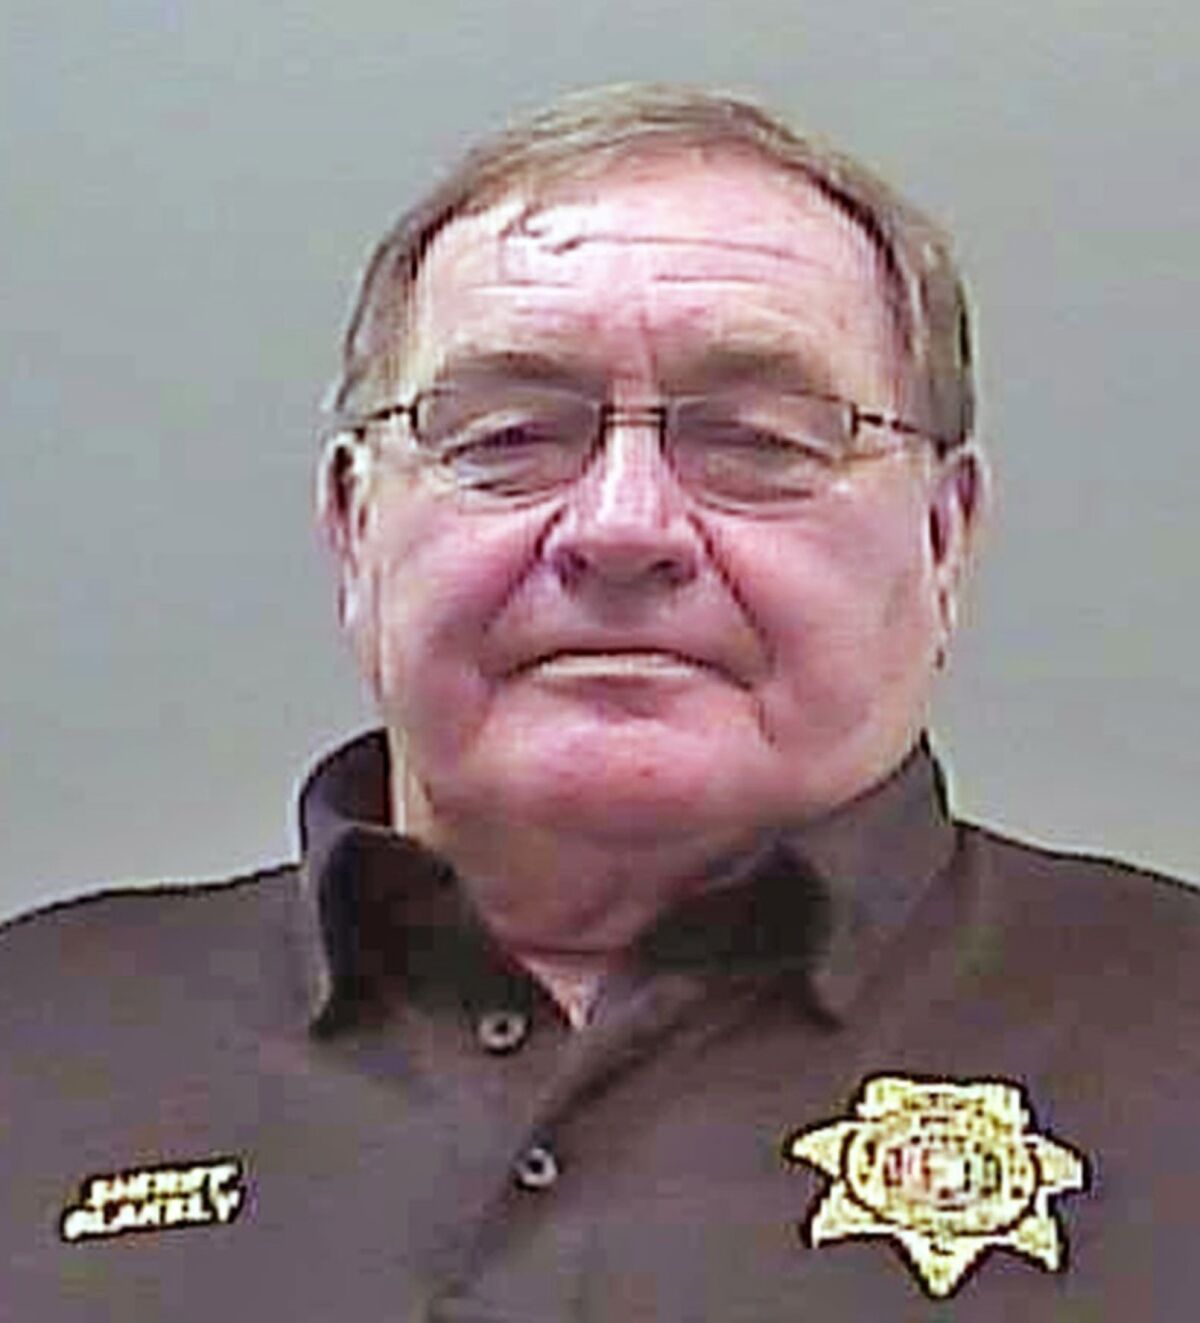 FILE - This Aug. 22, 2019, file photo provided by the Limestone Sheriff's Office shows Sheriff Mike Blakely following his arrest on theft and ethics charges, in Athens, Ala. Speaking with the media on Tuesday, Oct. 5, 2021, Blakely gave glowing reviews to the Limestone County Jail, where he spent time in custody even though he ran it for decades. (Limestone County Sheriff's Office via AP, File)